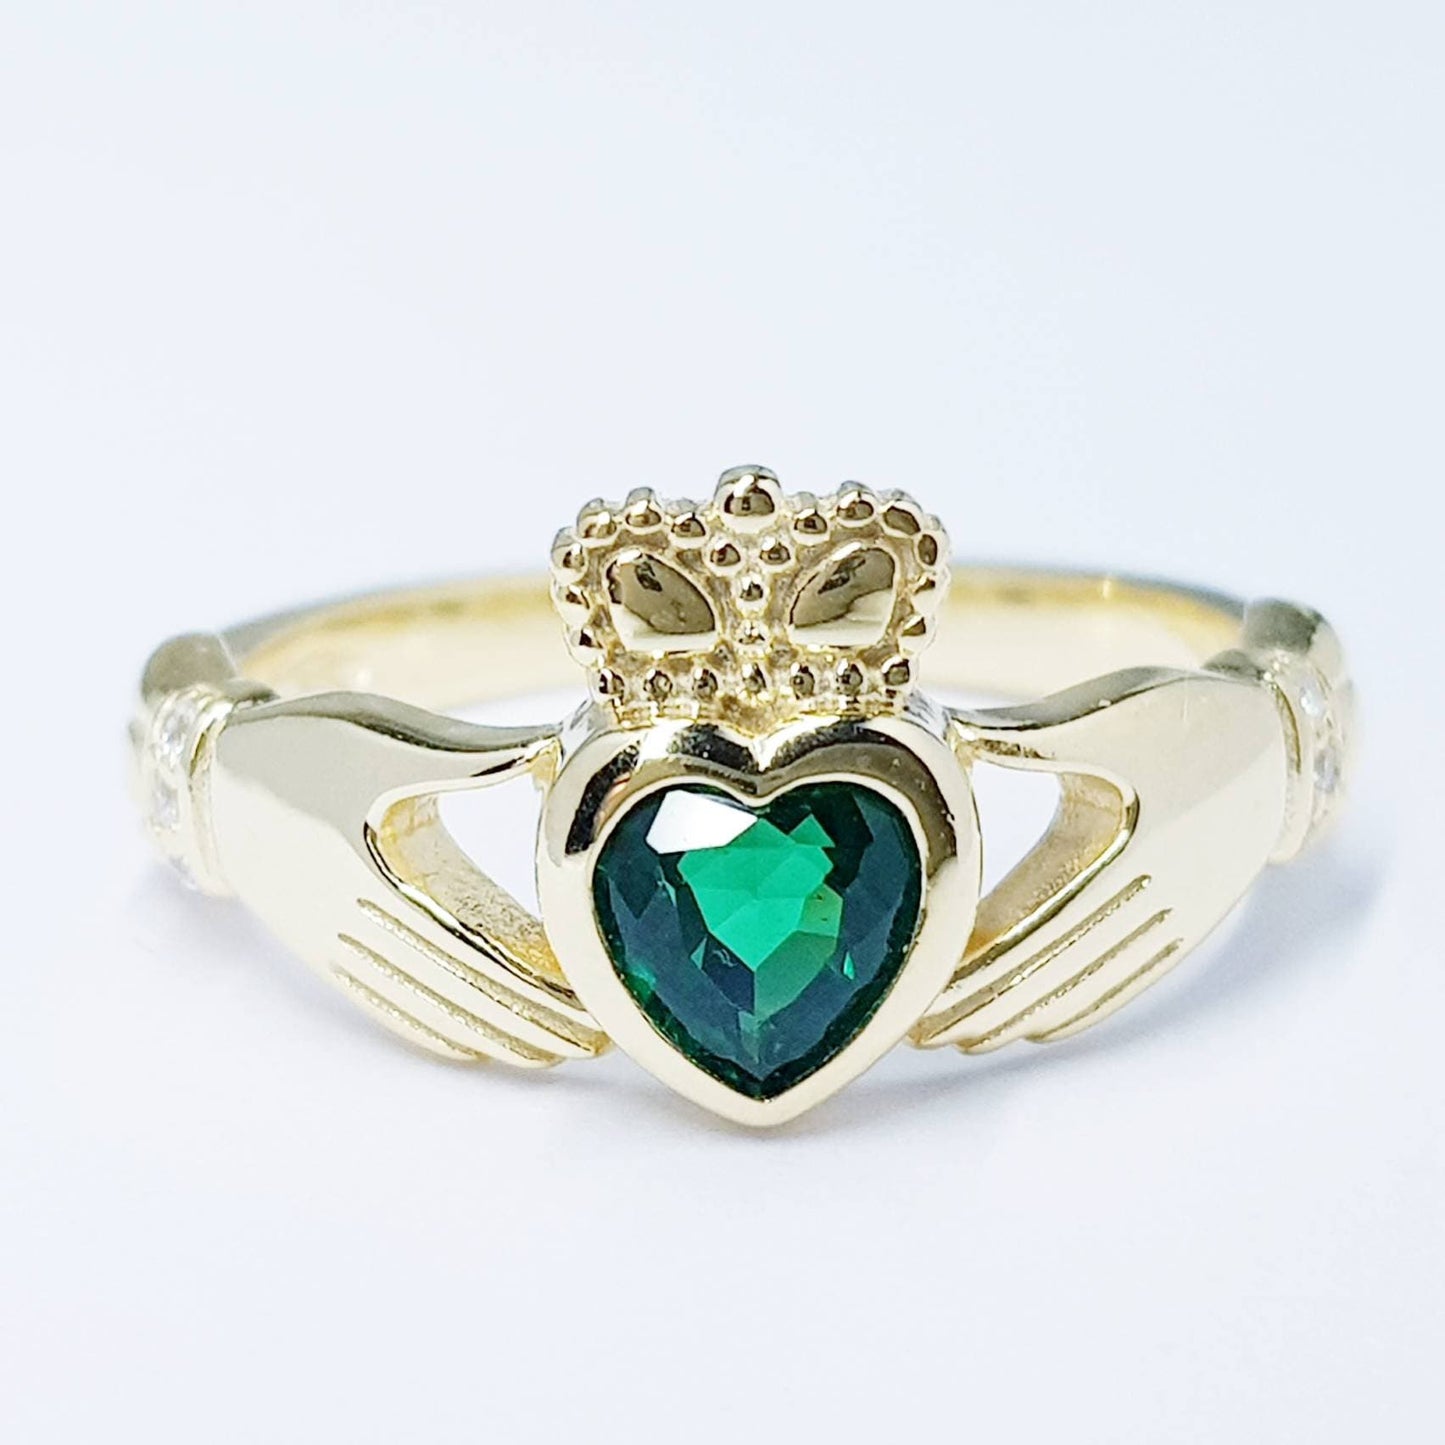 Sterling Silver Yellow Gold plated Claddagh ring set with emerald green heart shaped stone, may birthstone claddagh ring from Ireland